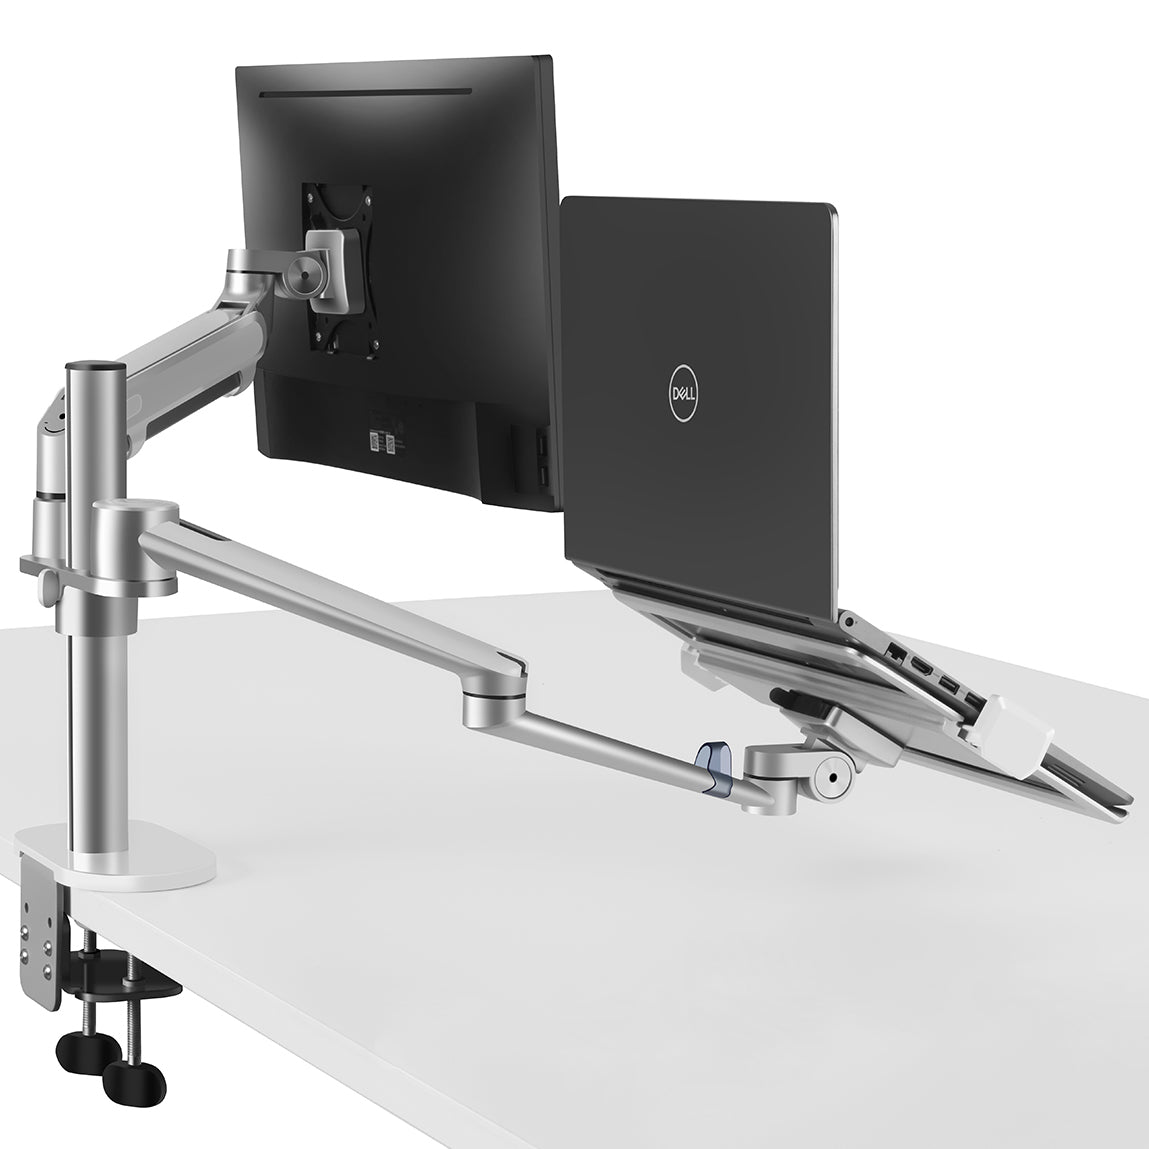 Laptop Stand and Monitor Arm with Gas Spring Desk Mount Bracket Silver